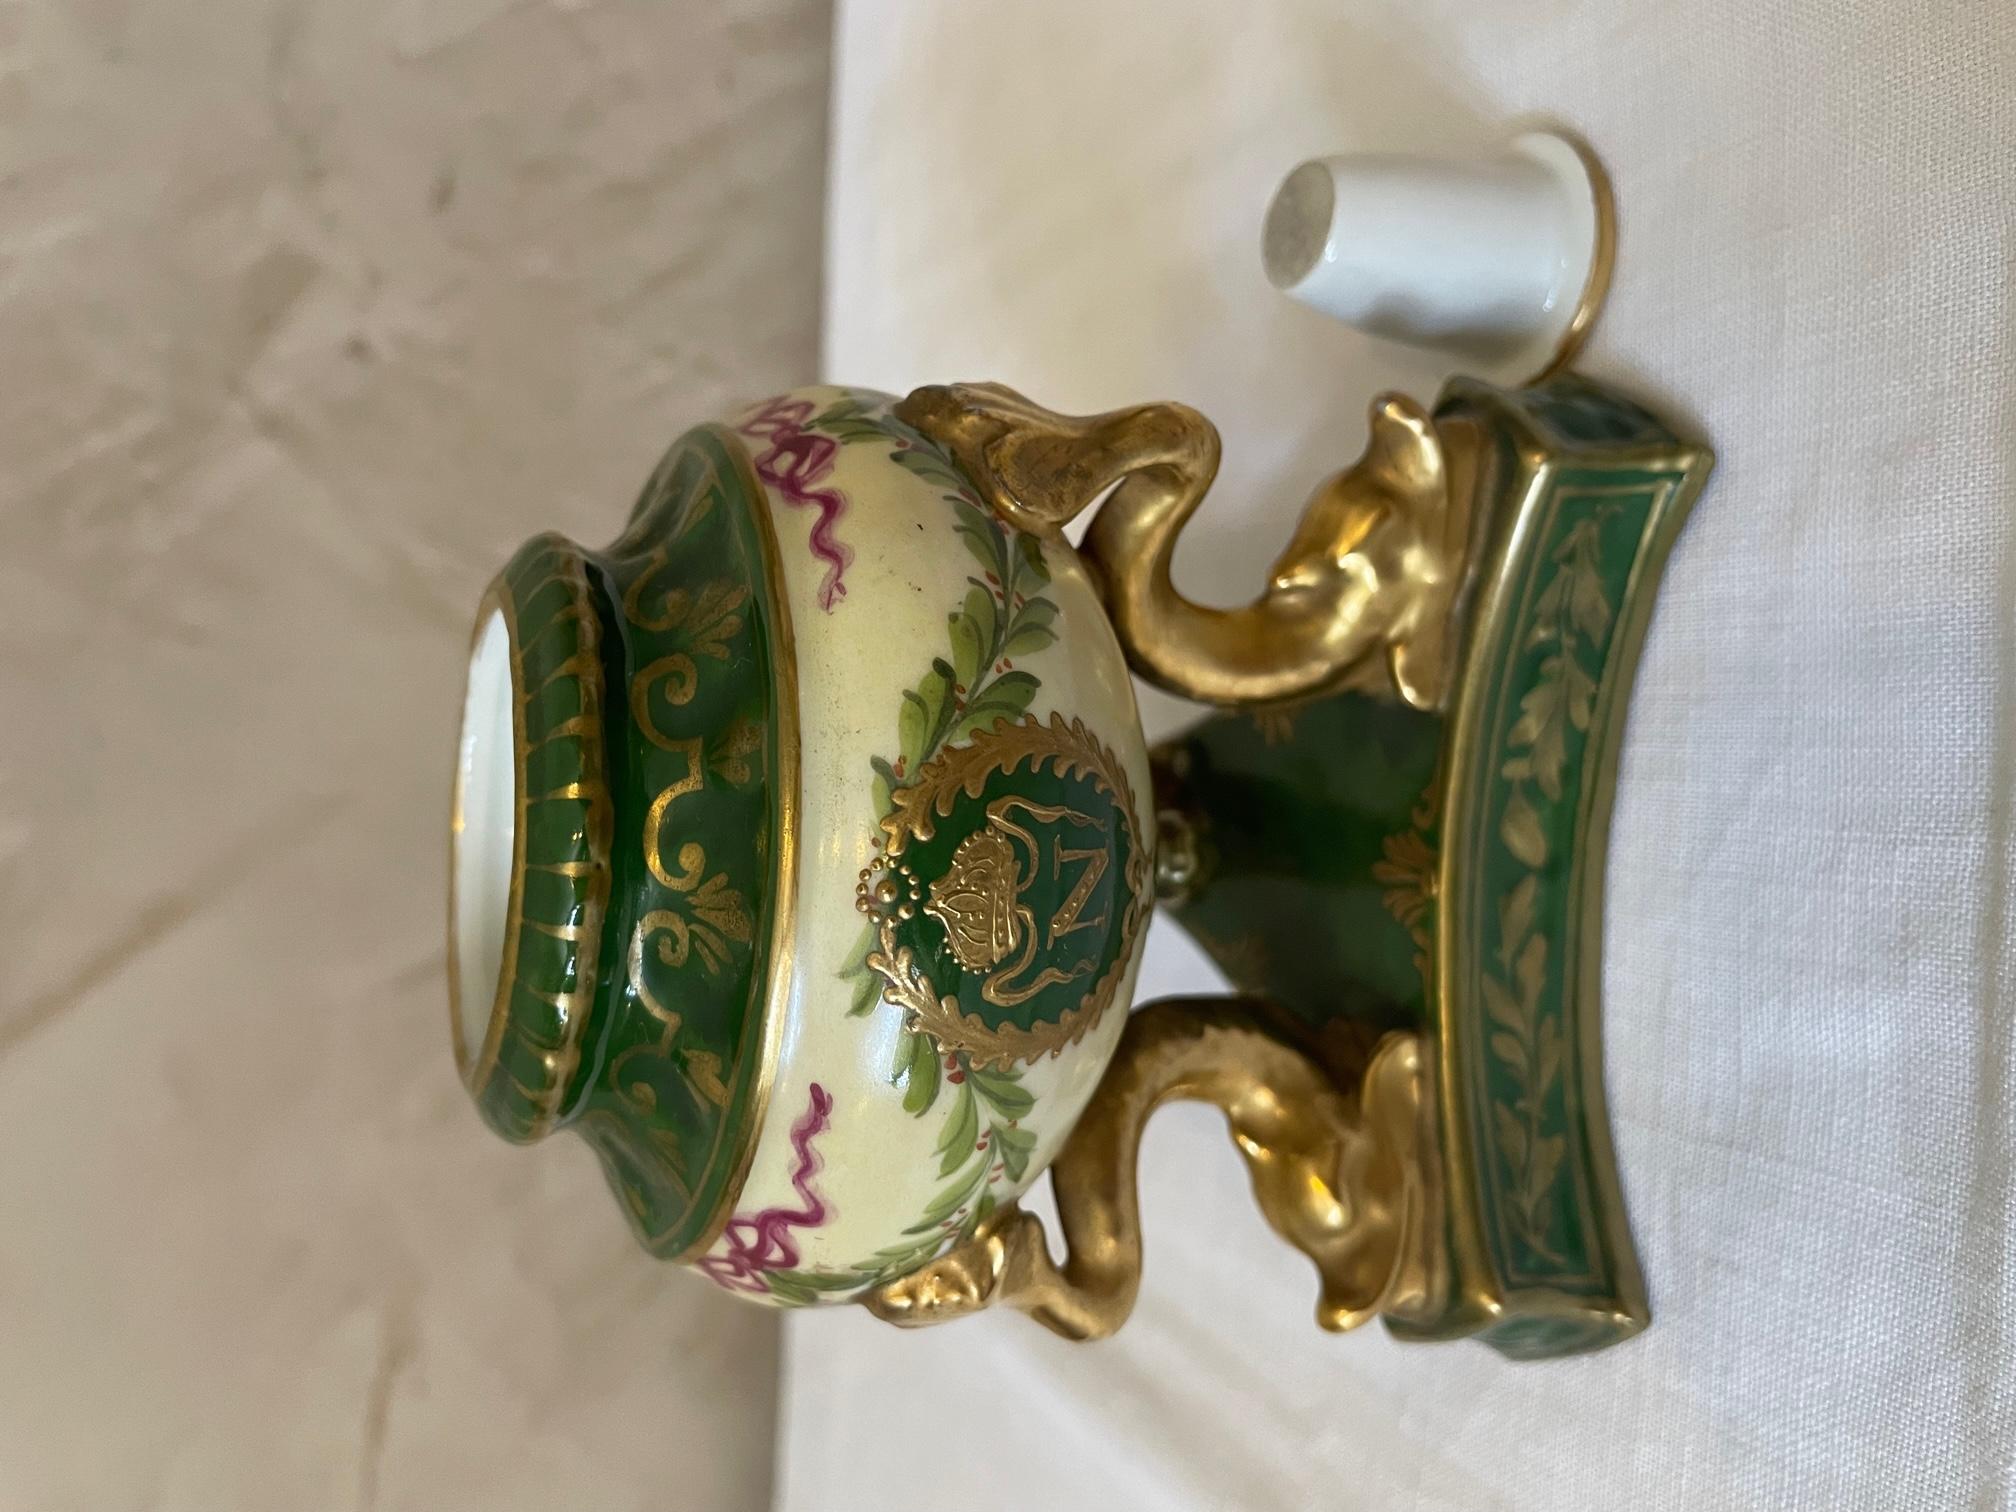 19th Century French Imperial Manufacture of Sevres Porcelain Inkwell For Sale 5